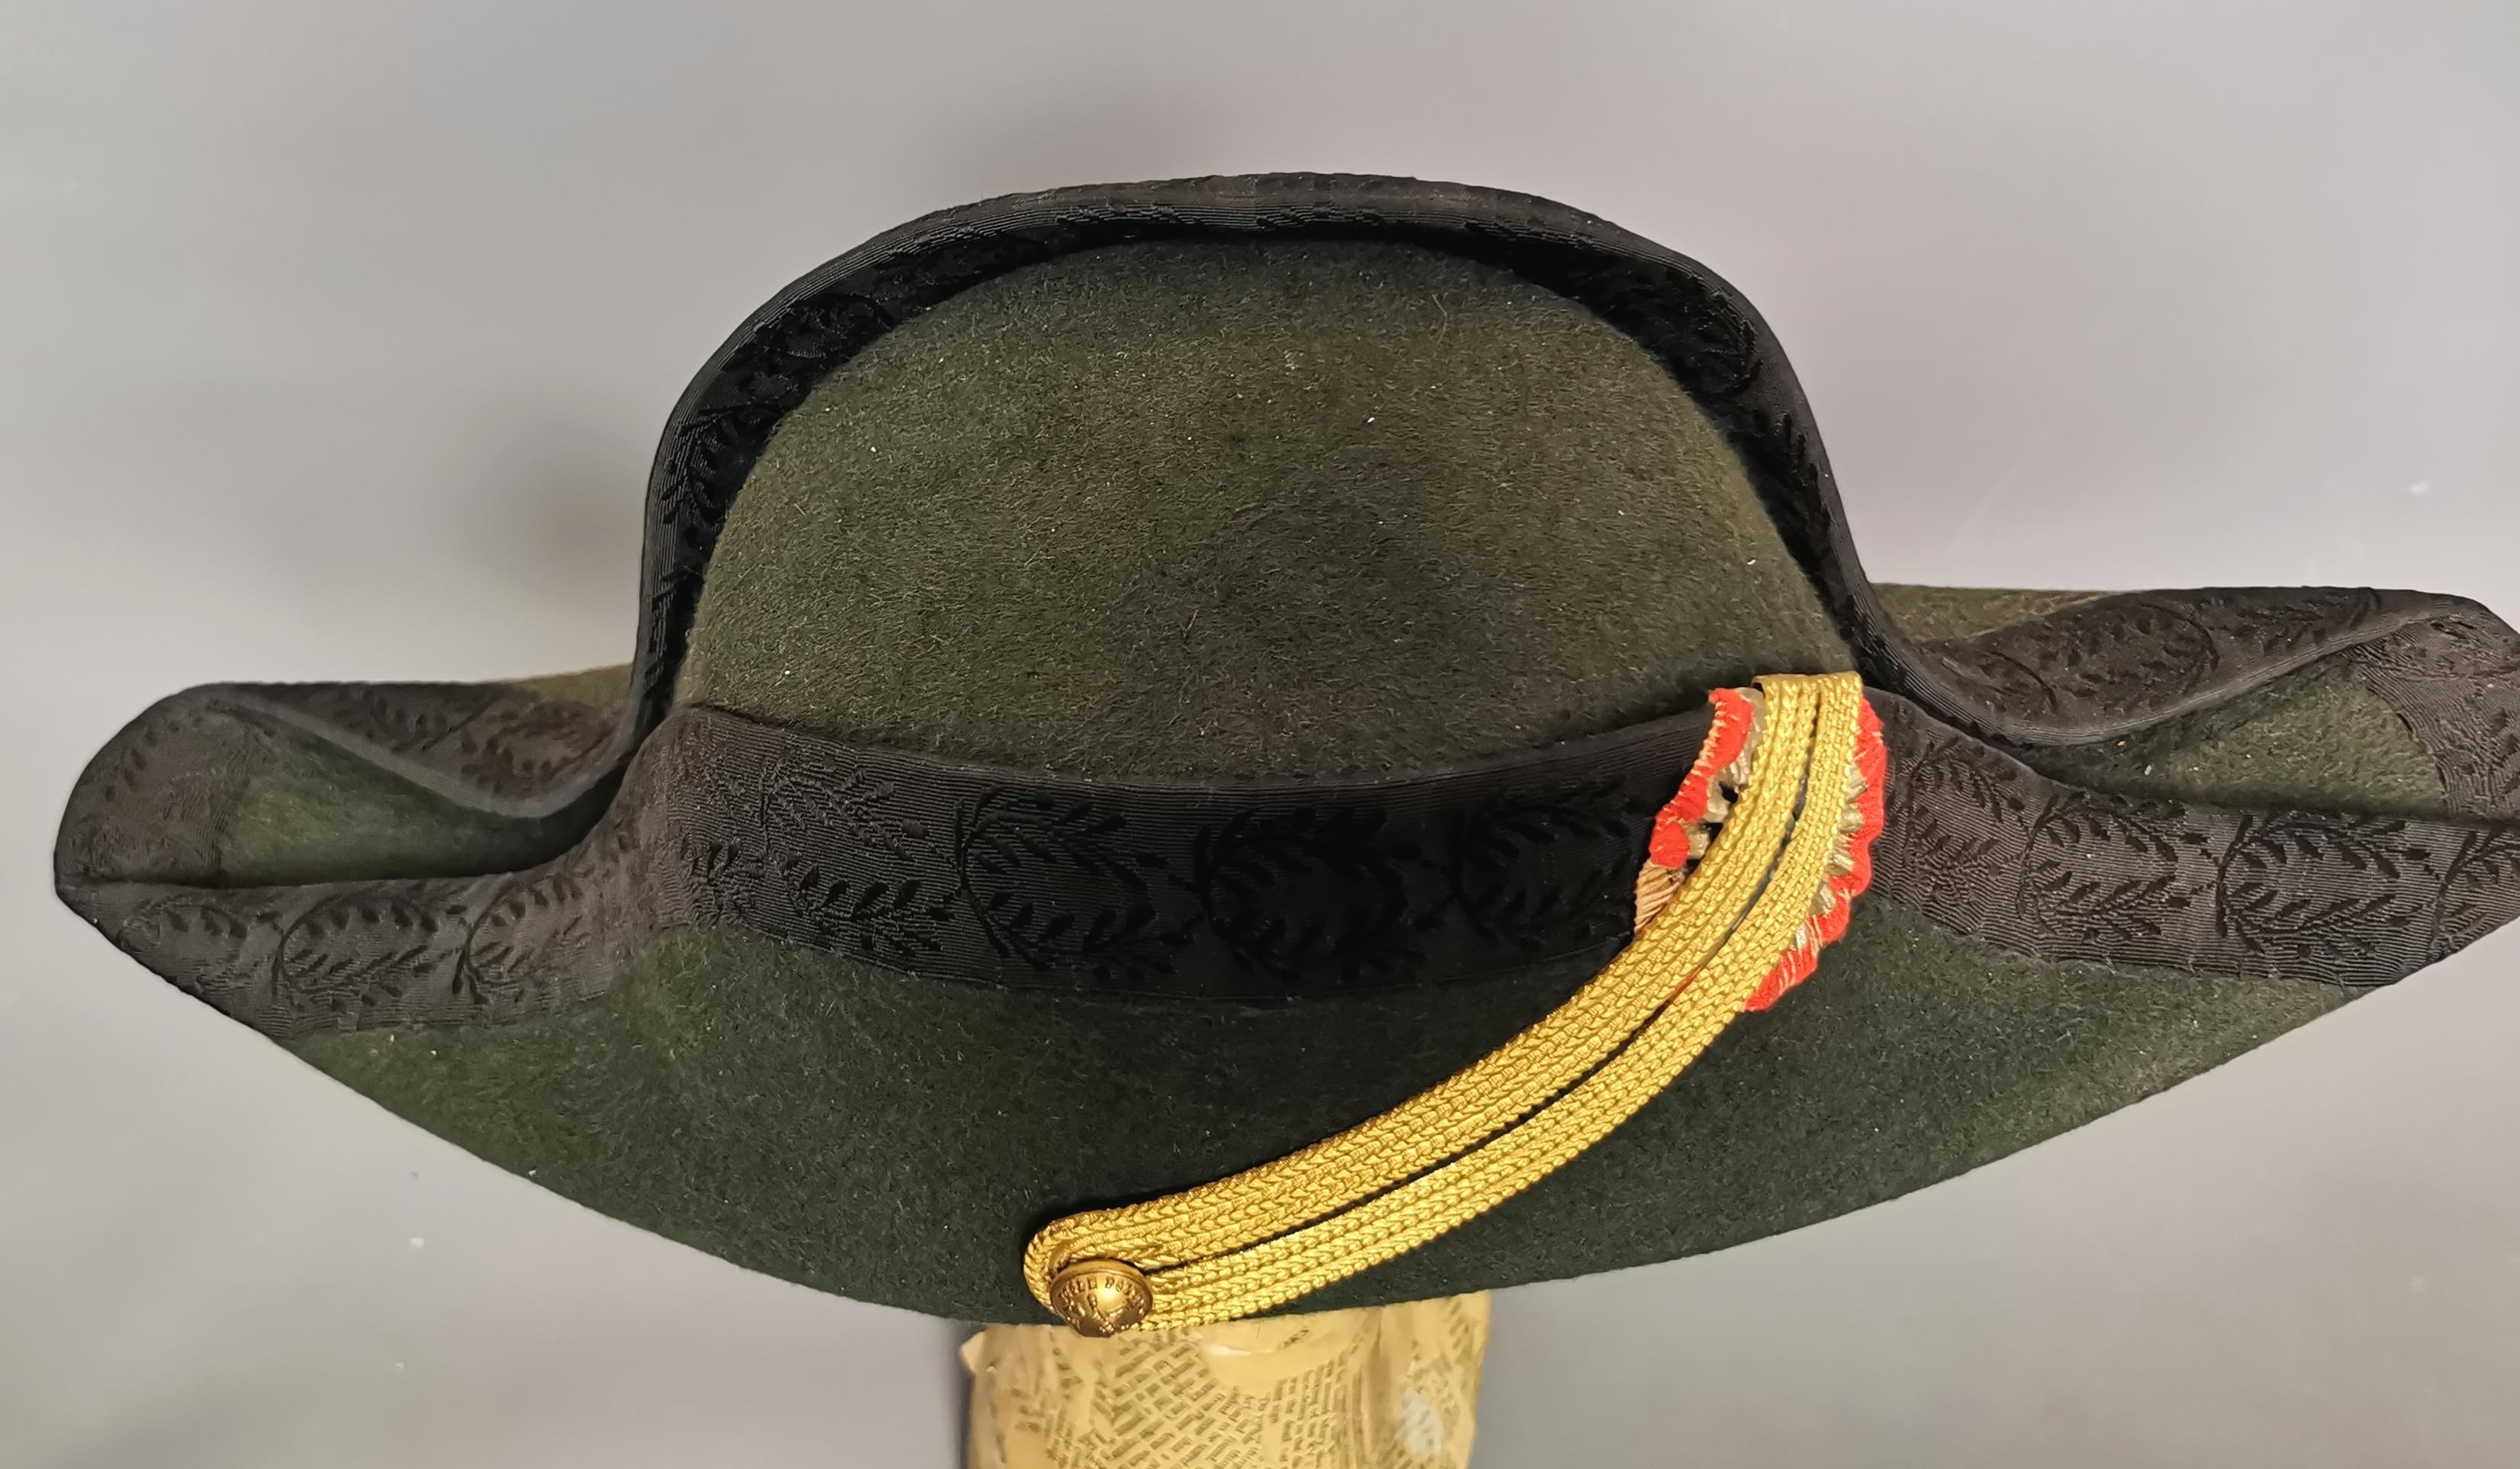 Antique French Military bicorn hat, 19th century  6